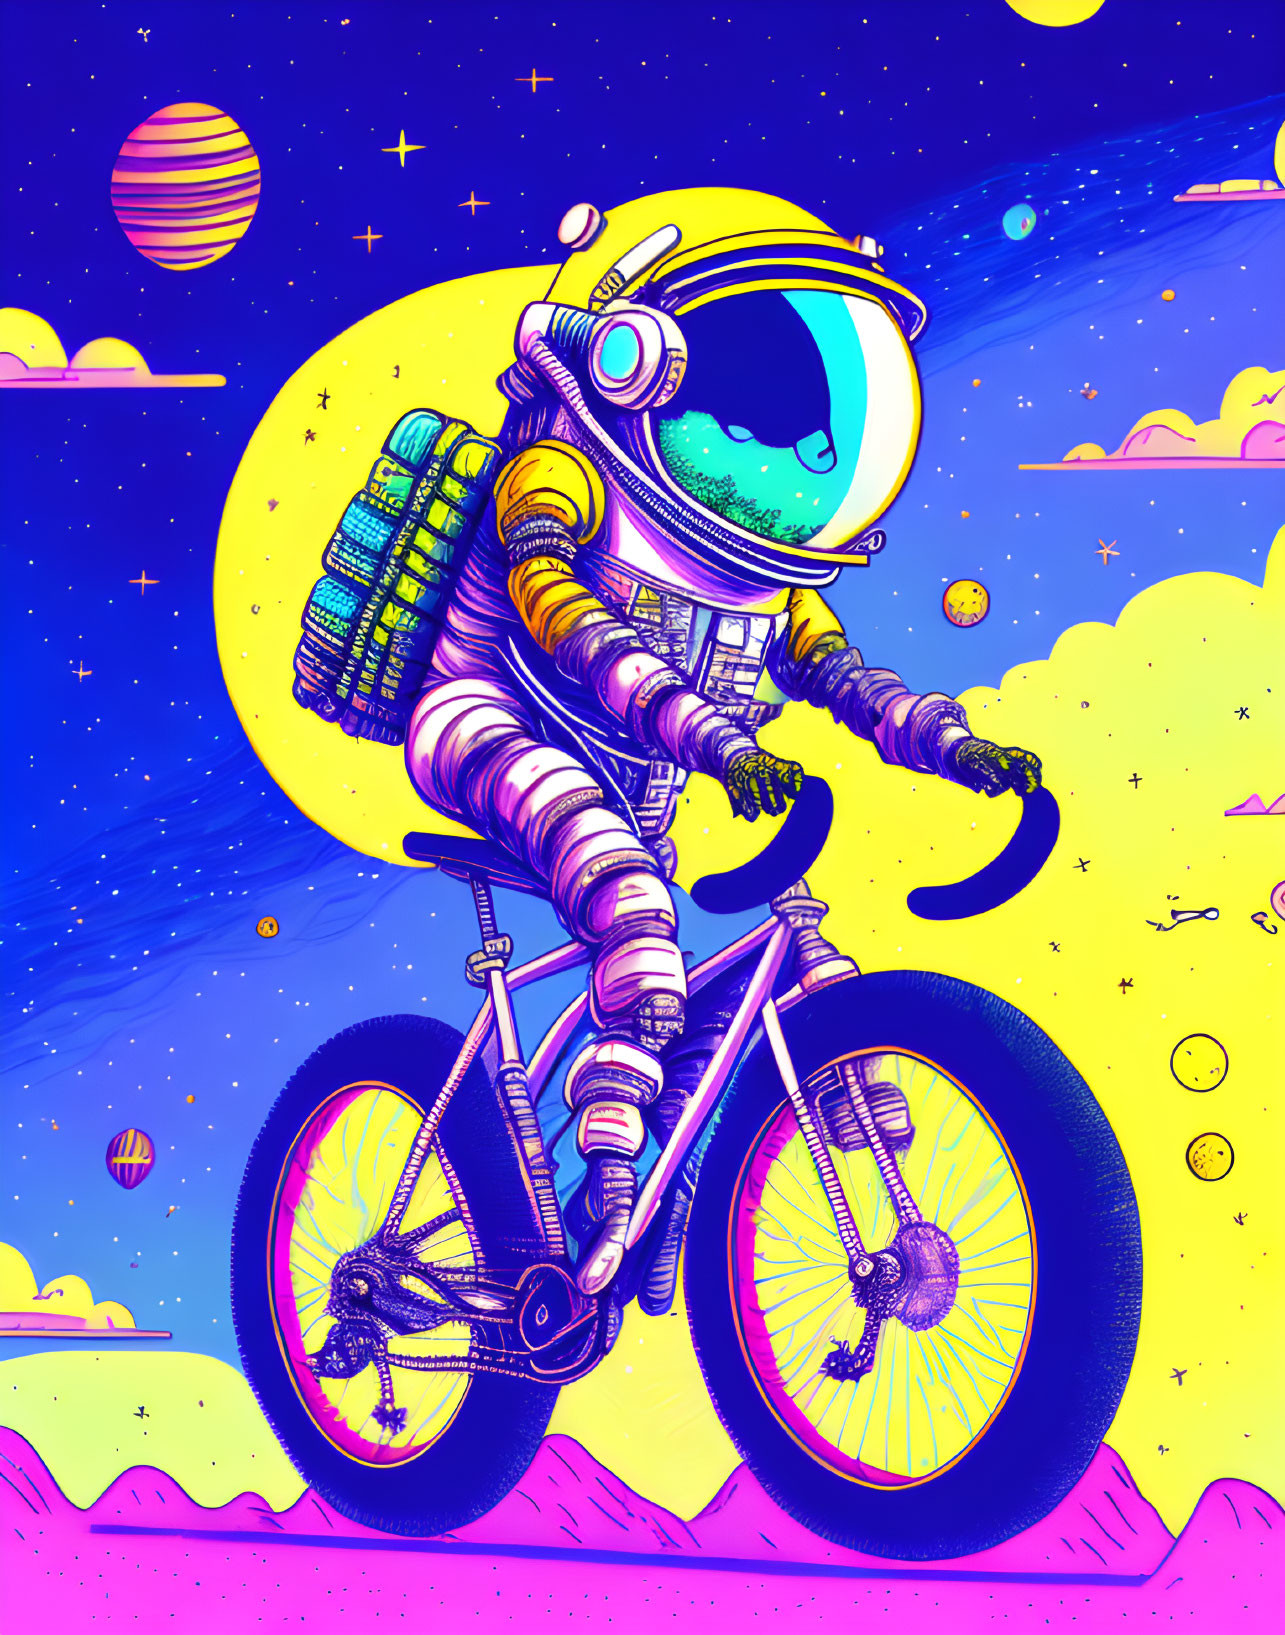 Colorful astronaut on bicycle in alien landscape with planets and stars